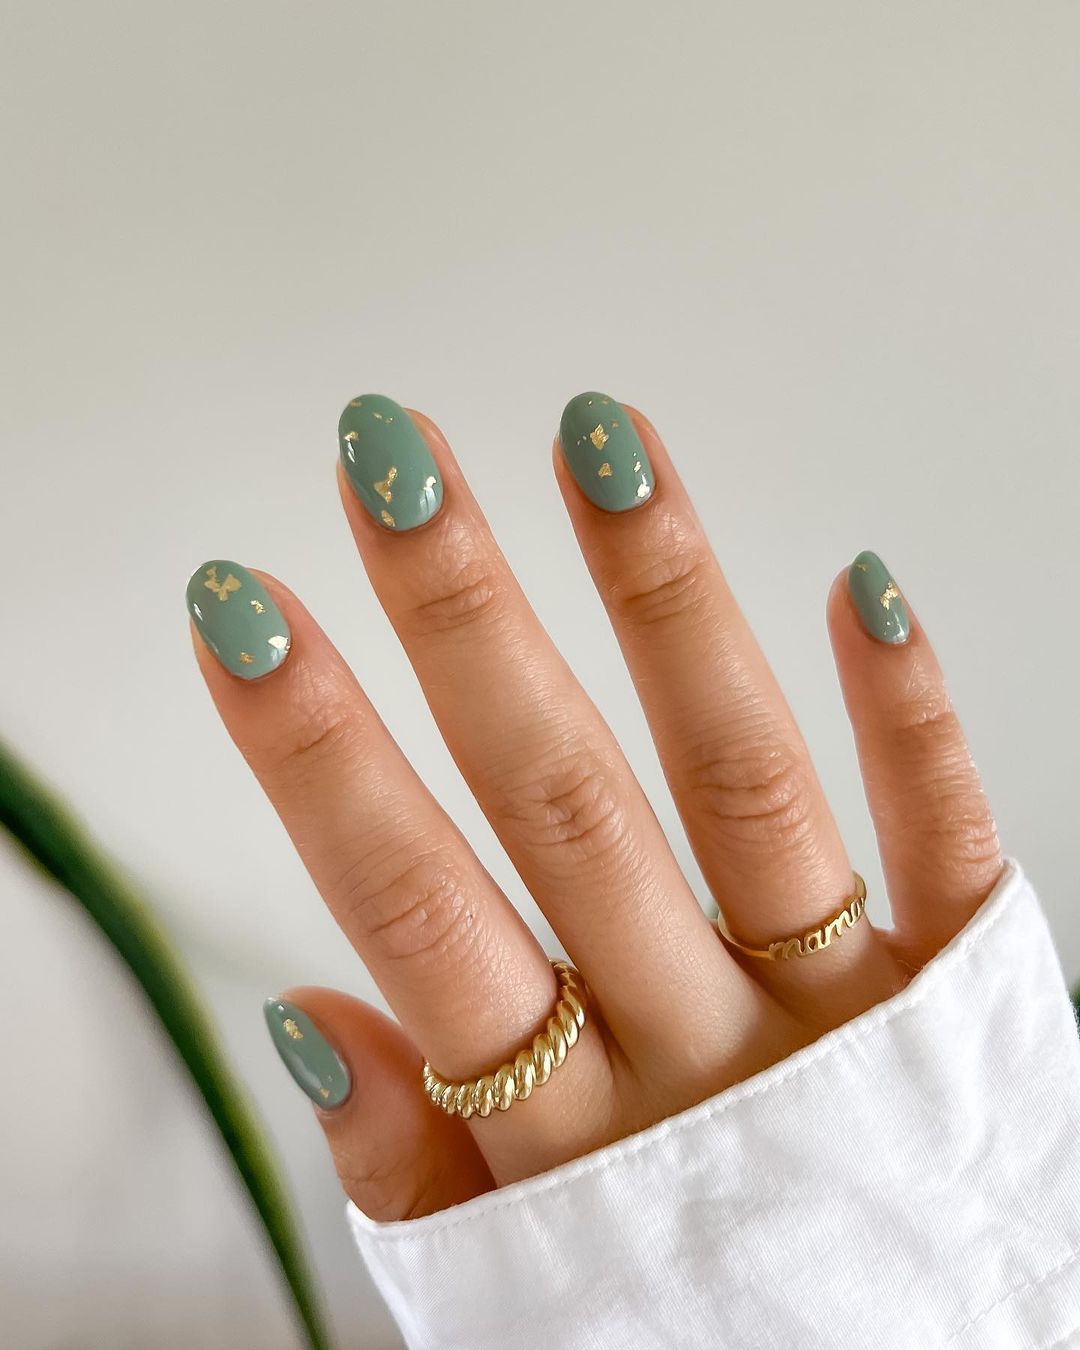 30 Easy Nails & Nail Art Designs To Try In 2022 images 20